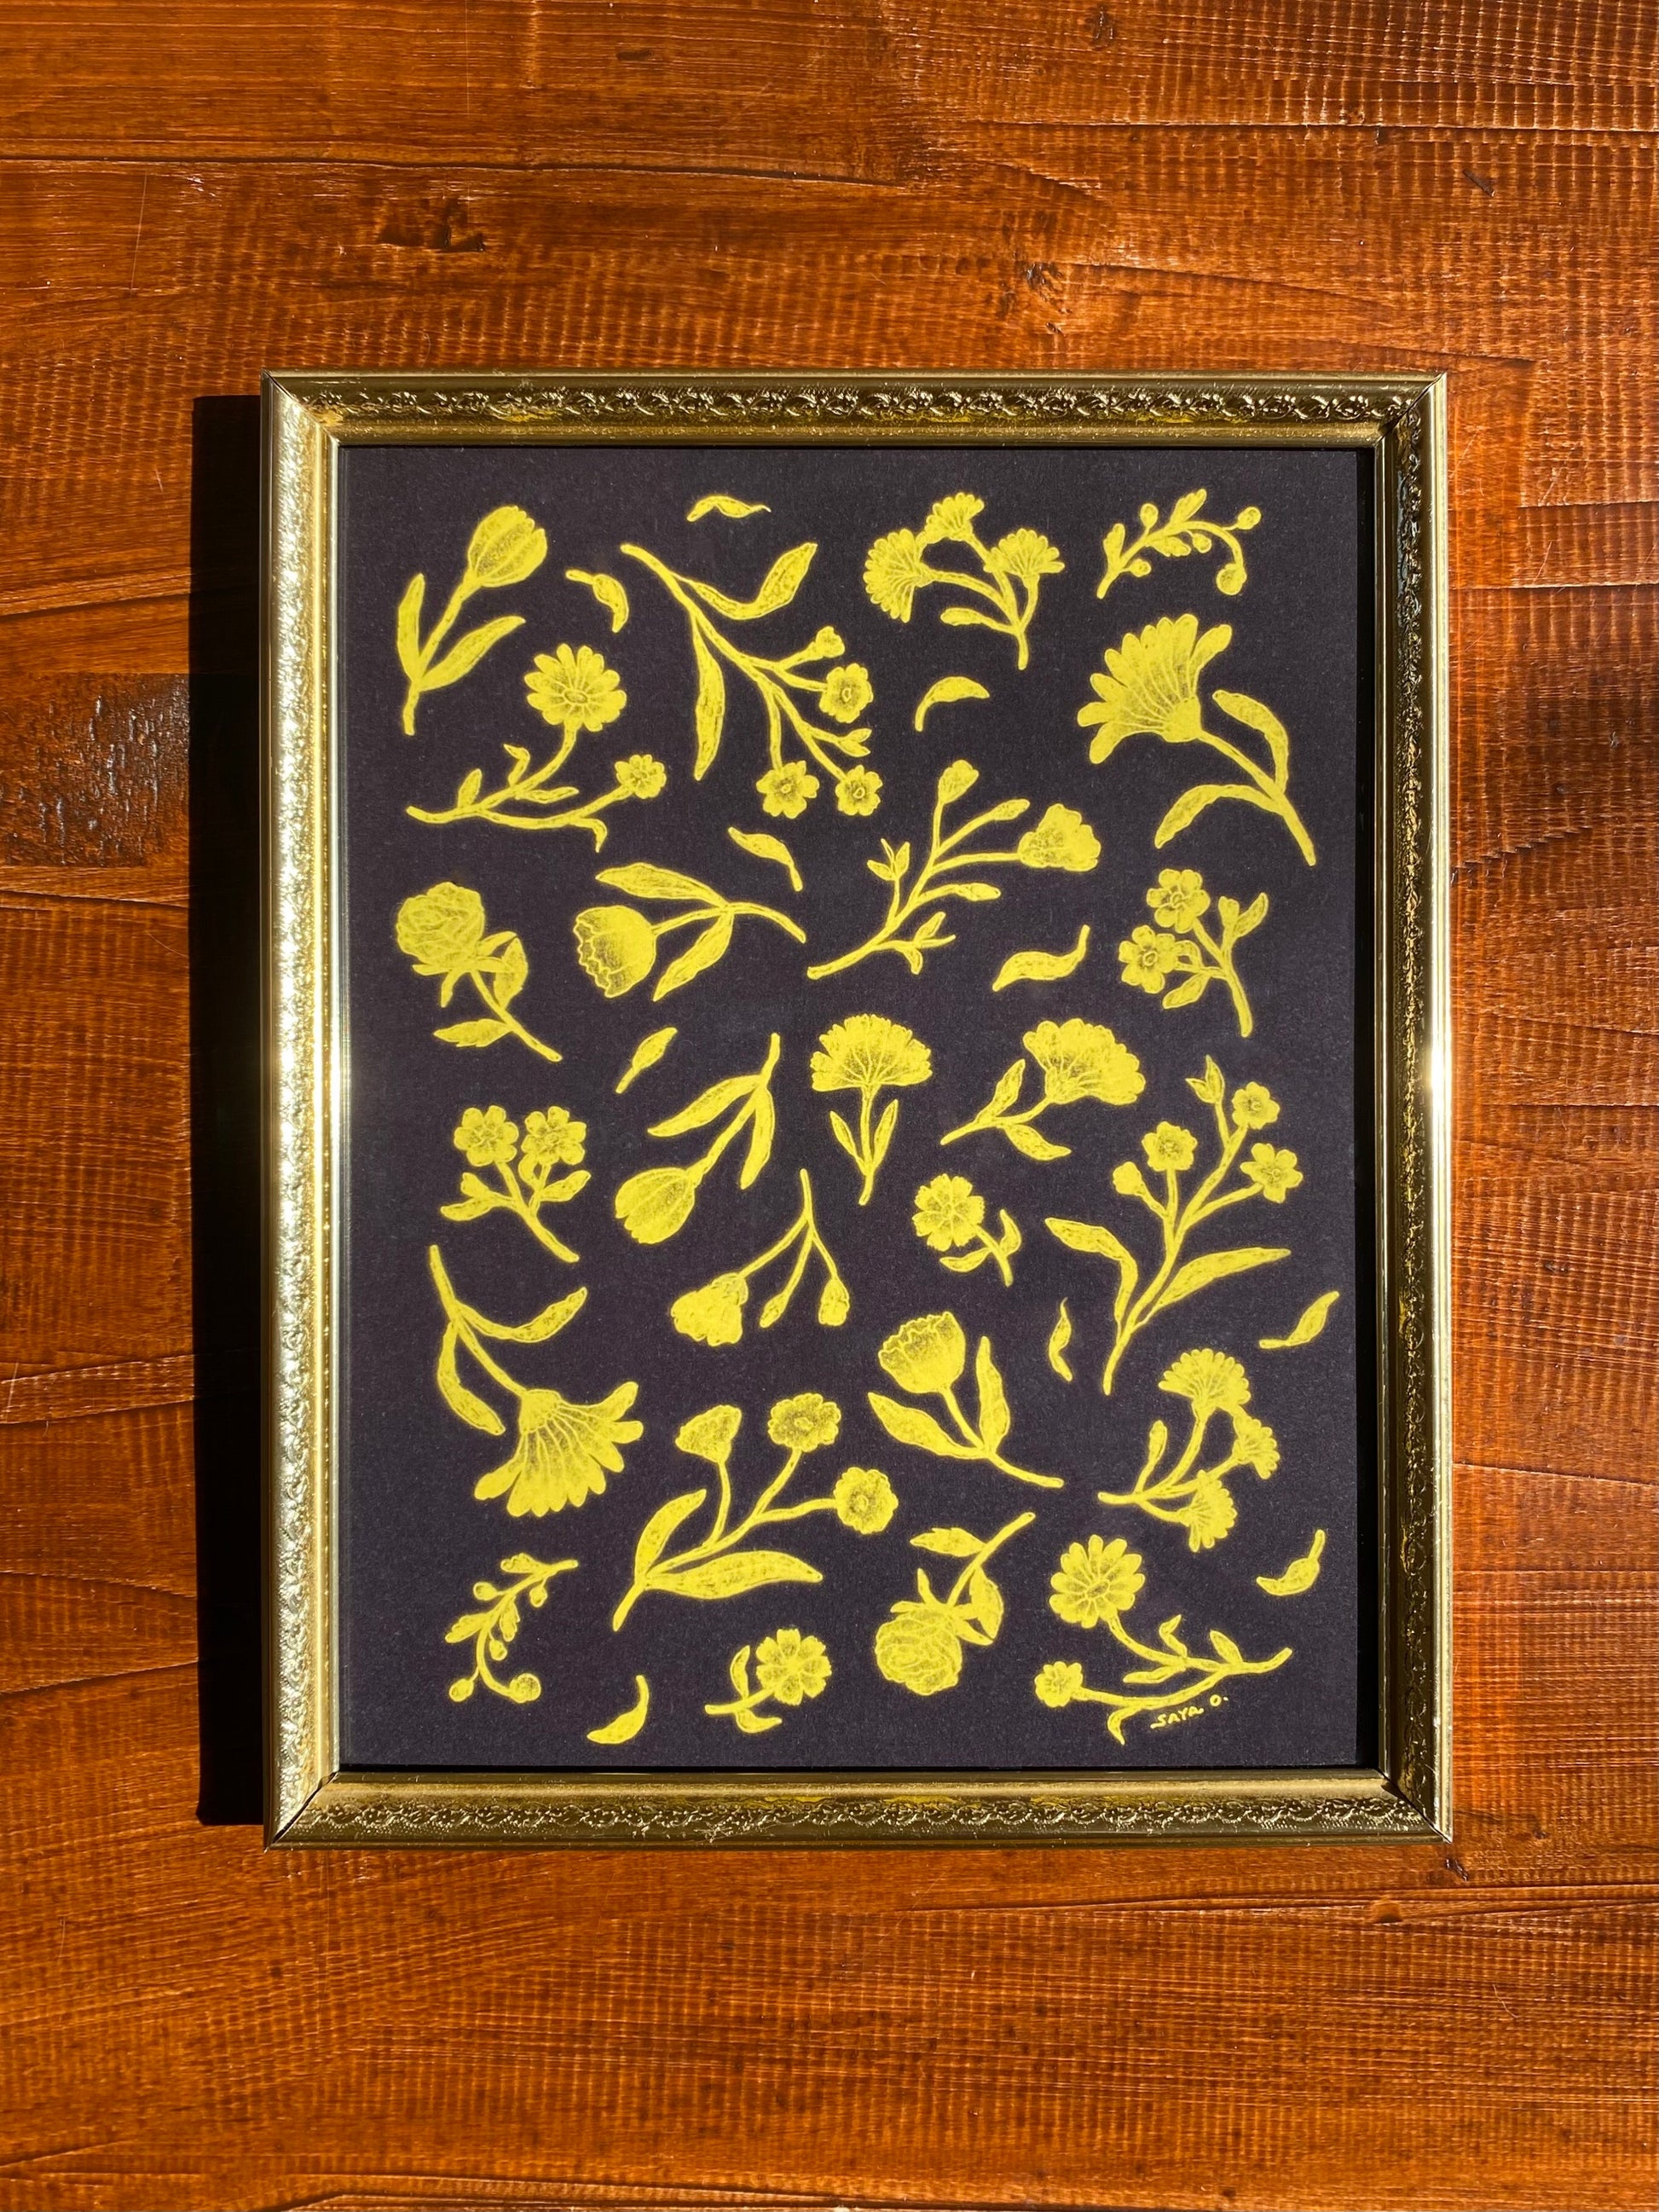 A classic floral print with deep yellow flowers on a black background in a gold frame